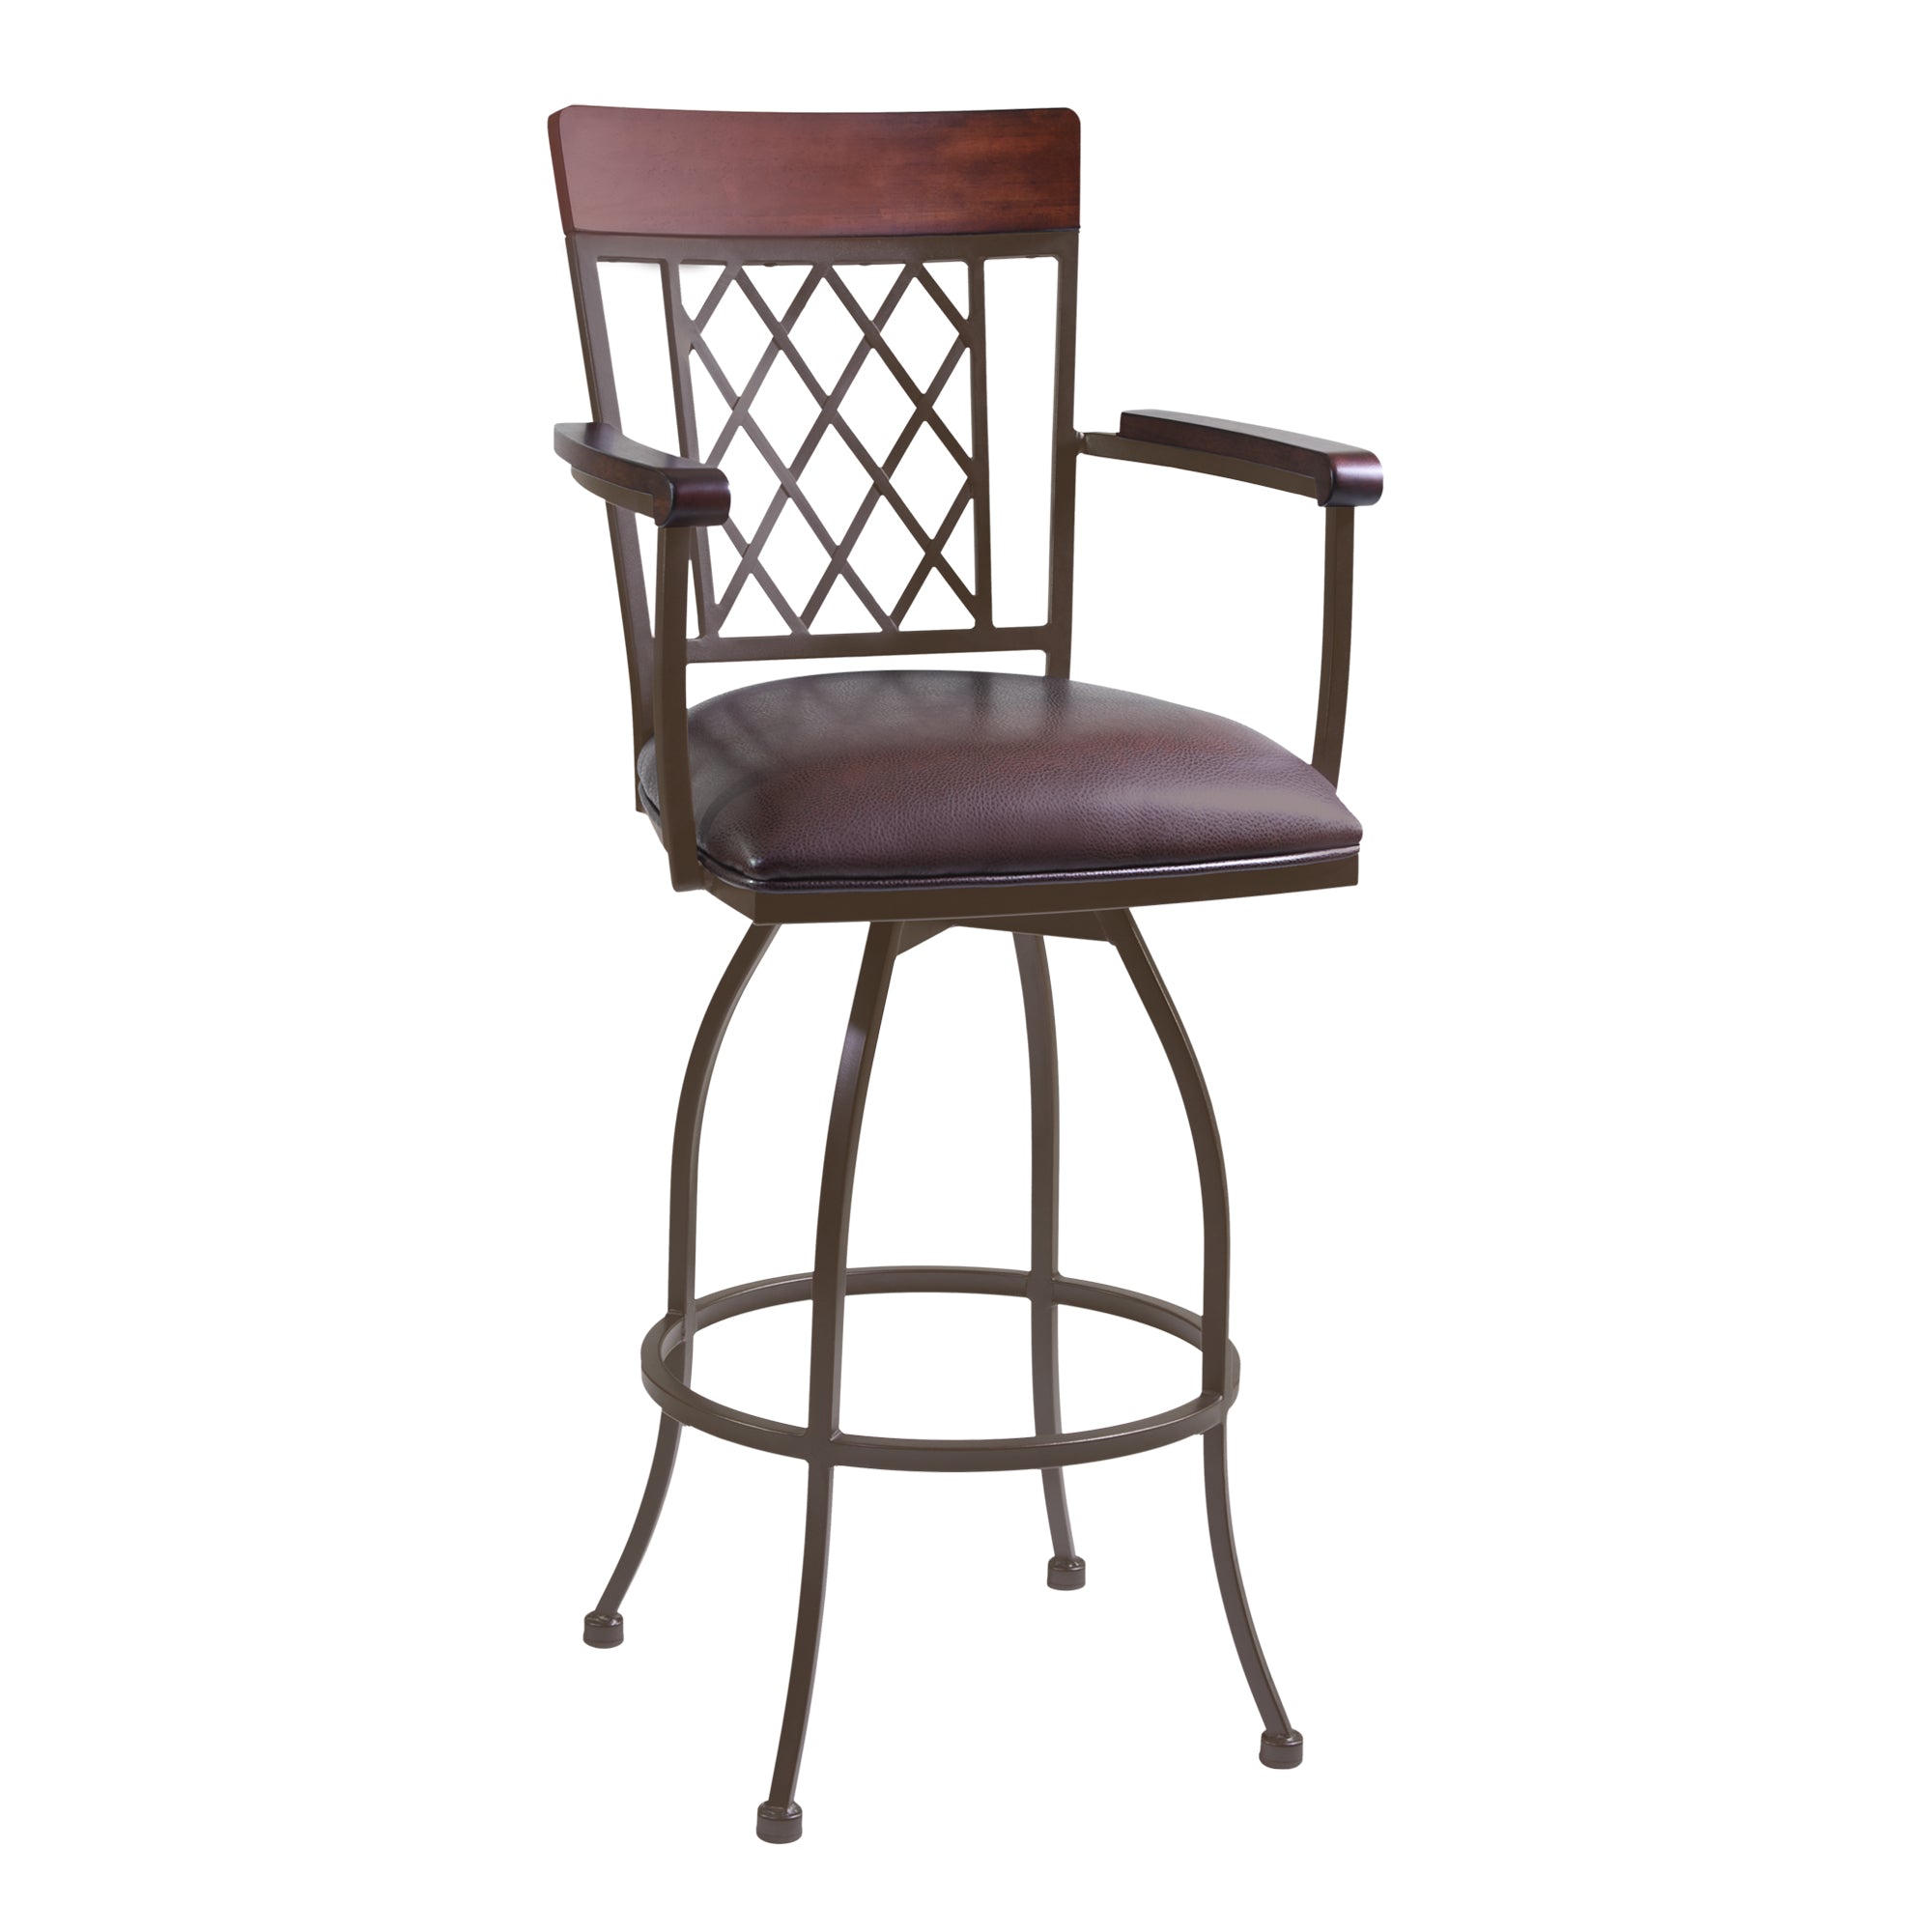 Armen Living Lcna30arbabr Napa 30" Bar Height Arm Barstool In Auburn Bay Finish With Brown Faux Leather